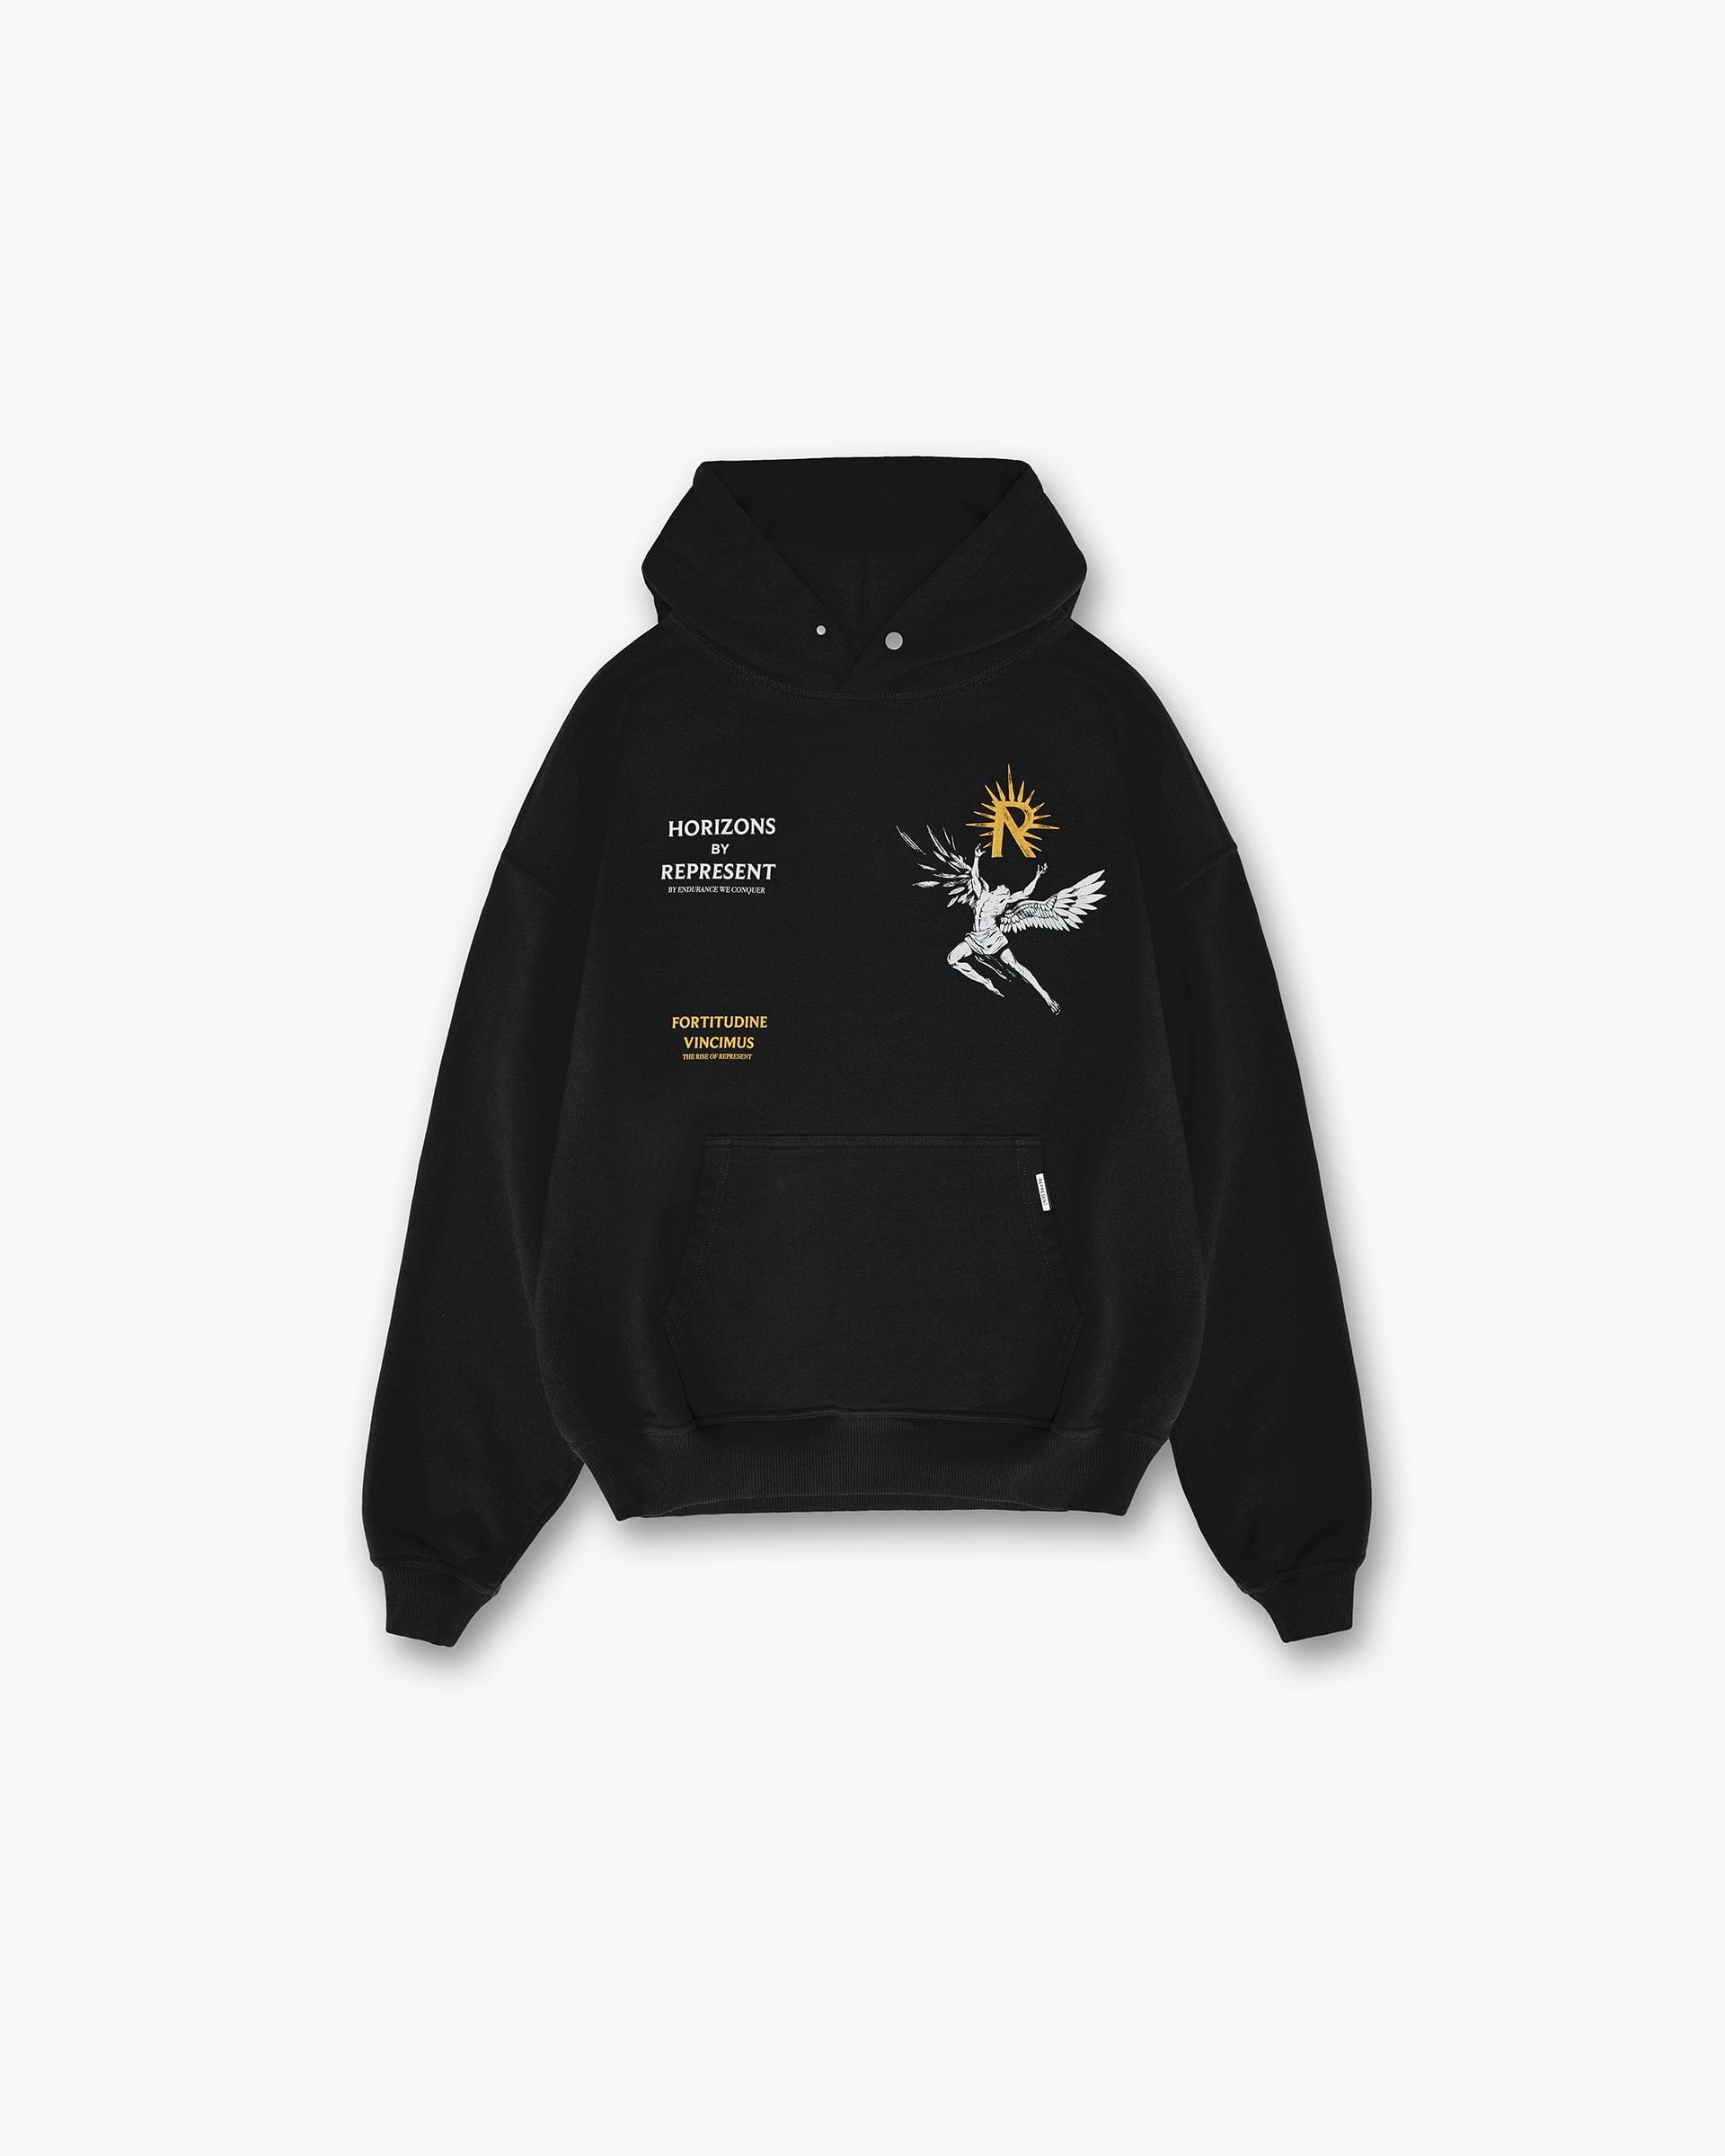 CONQUER YOUR GAME HOODIE